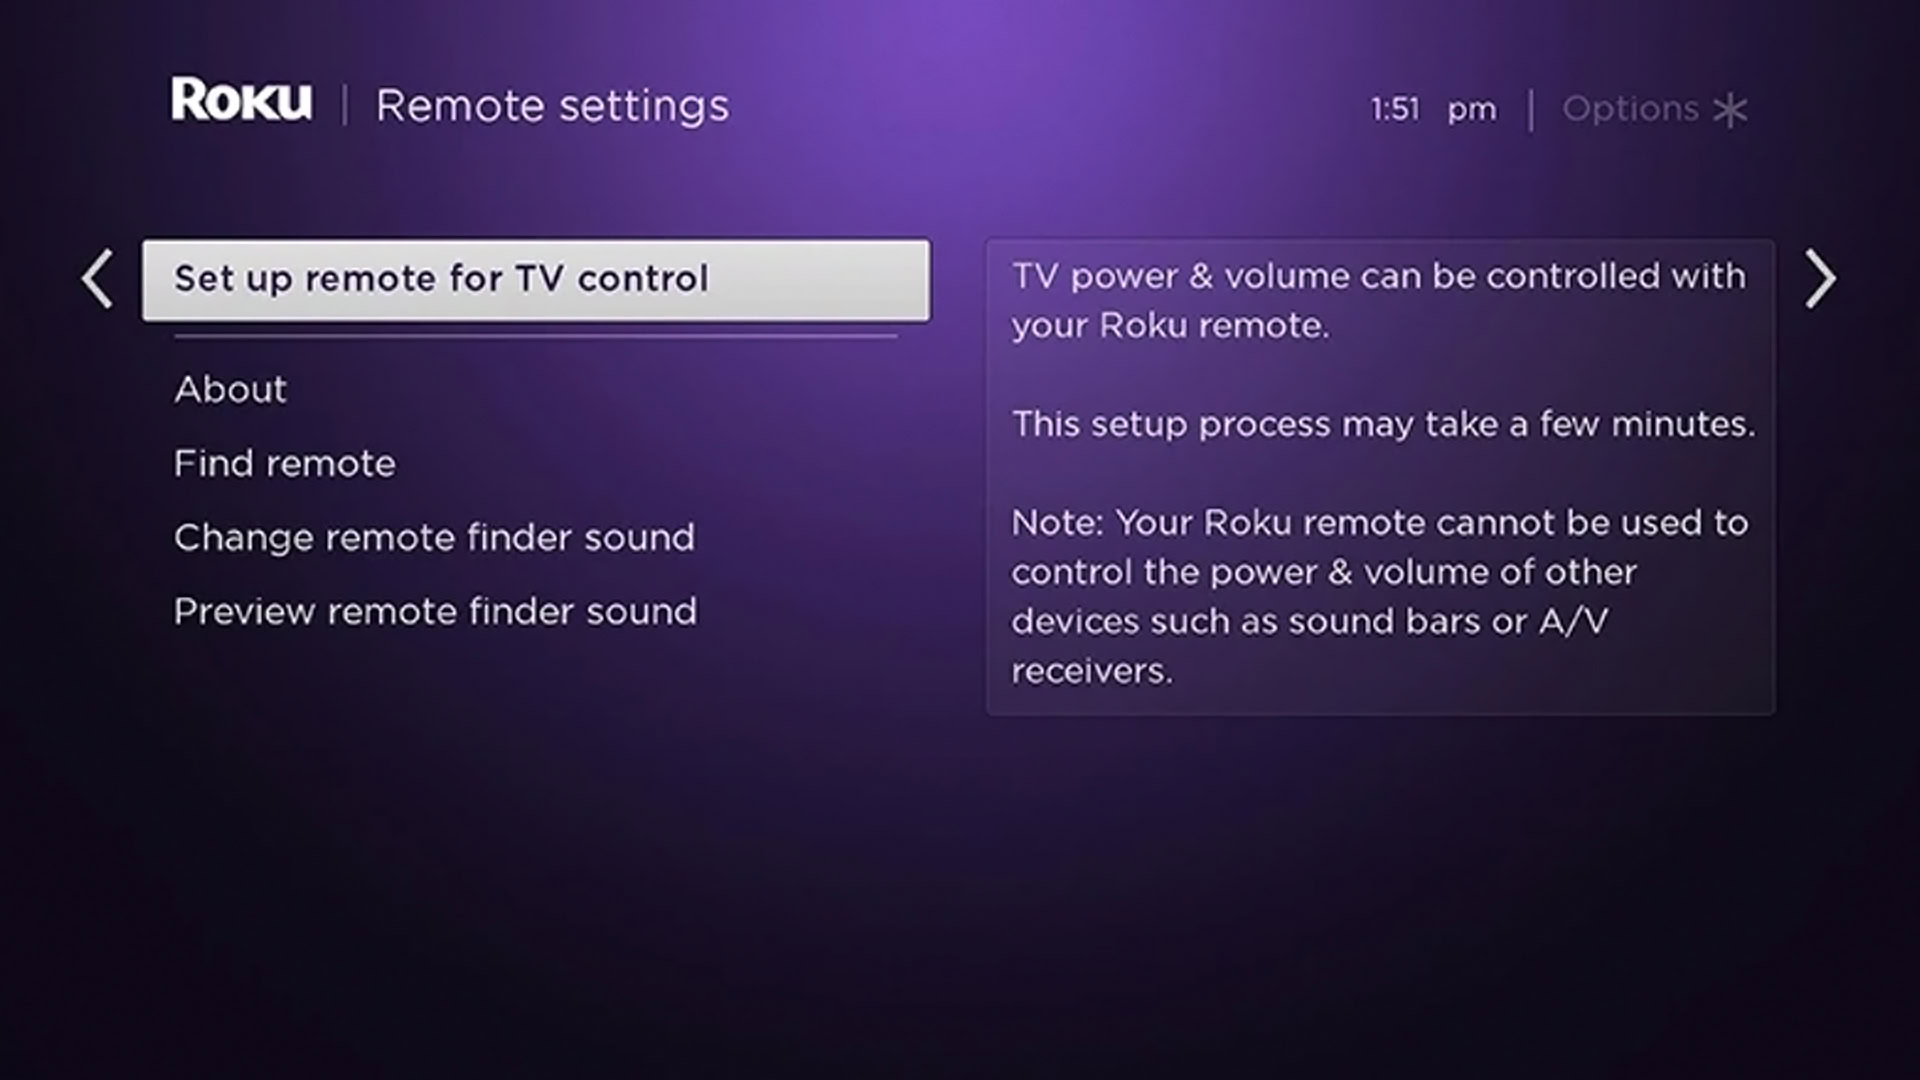 Remote settings for Roku